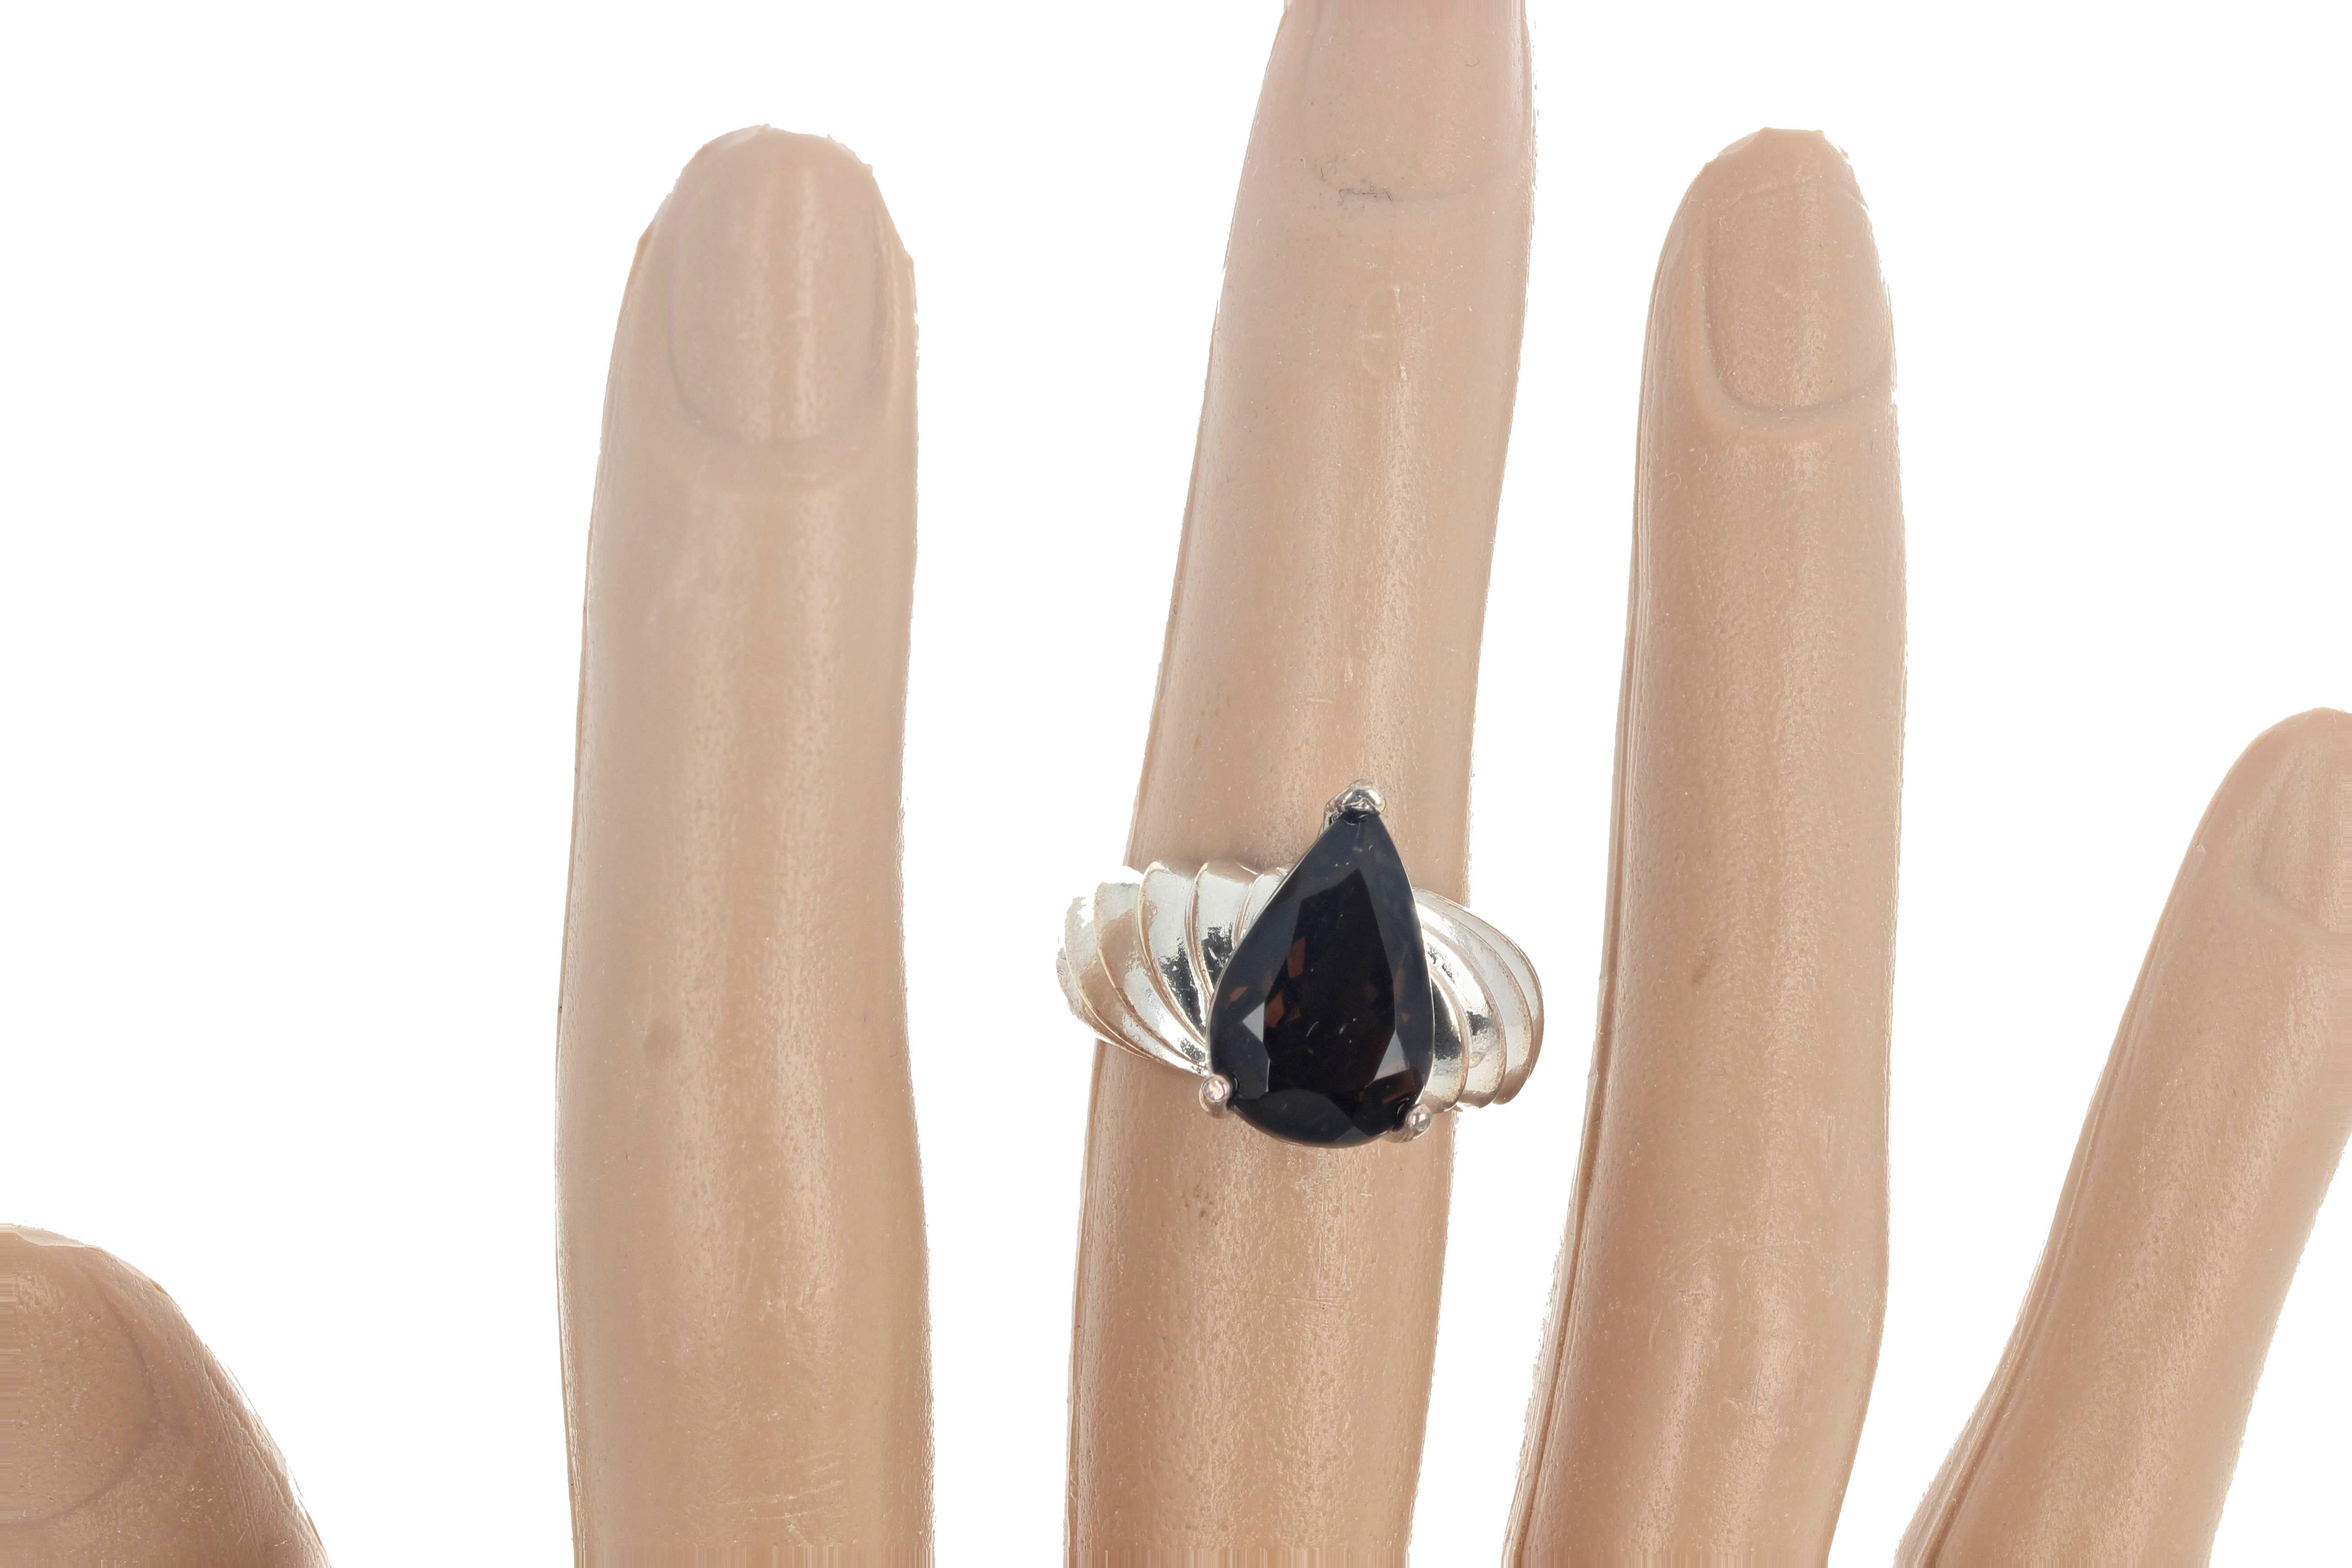 AJD Dark Intense 2.45 Ct Natural Smoky Quartz Sterling Silver Ring In New Condition For Sale In Raleigh, NC